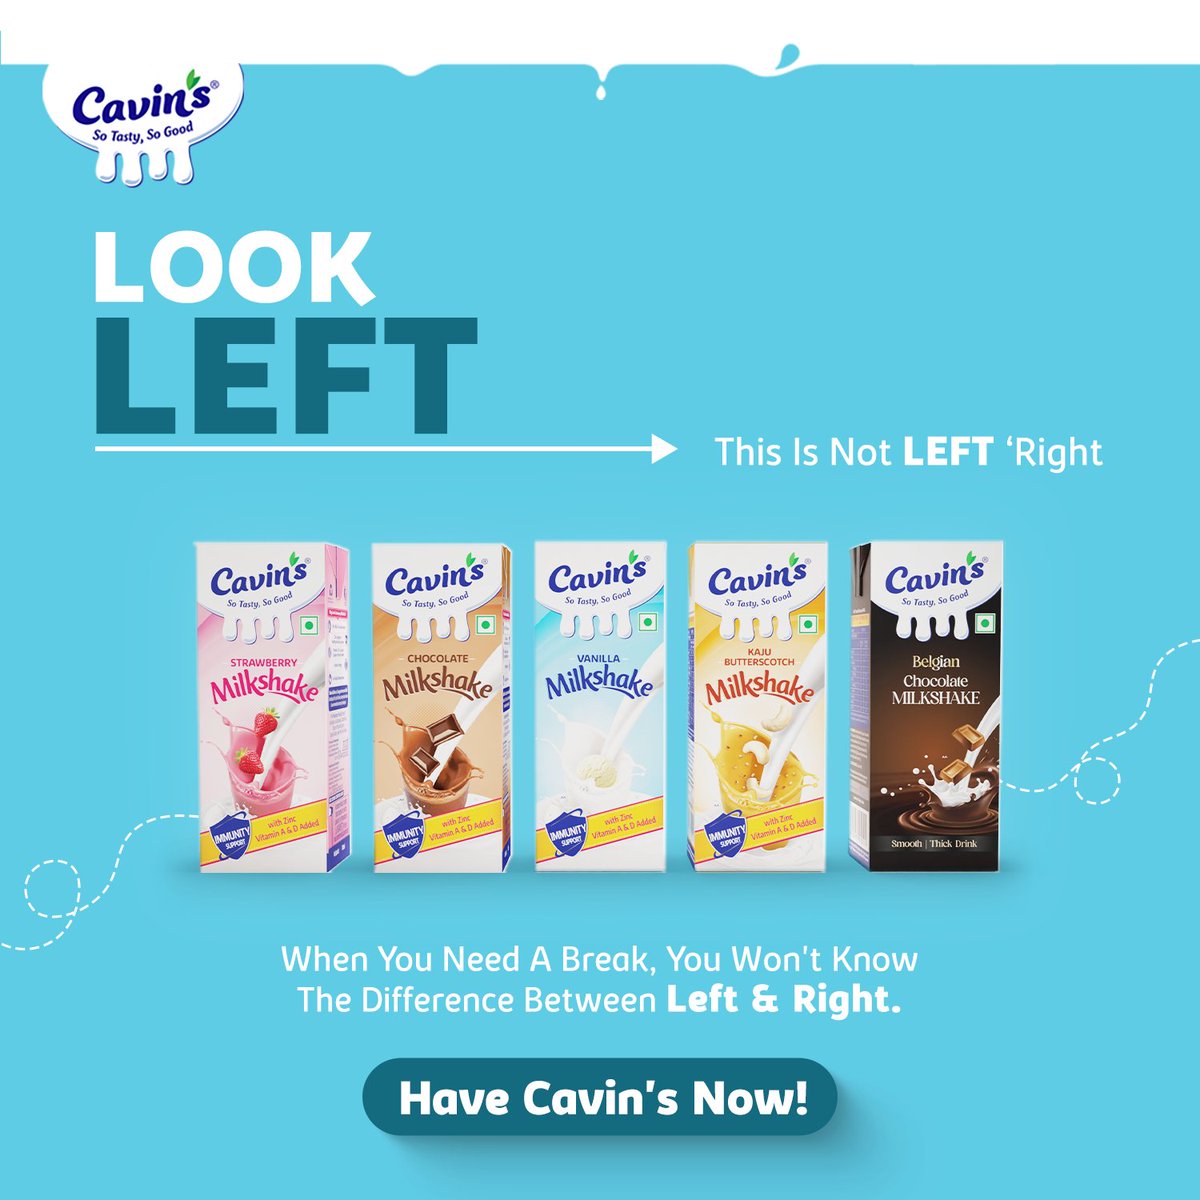 Life might be confusing sometimes. But one thing that is certain is that Cavin's will always be there for you. Take a break and sip into the simplicity of joy. bitly.ws/VpWP #Cavins #CavinsMilkshakes #TakeABreak